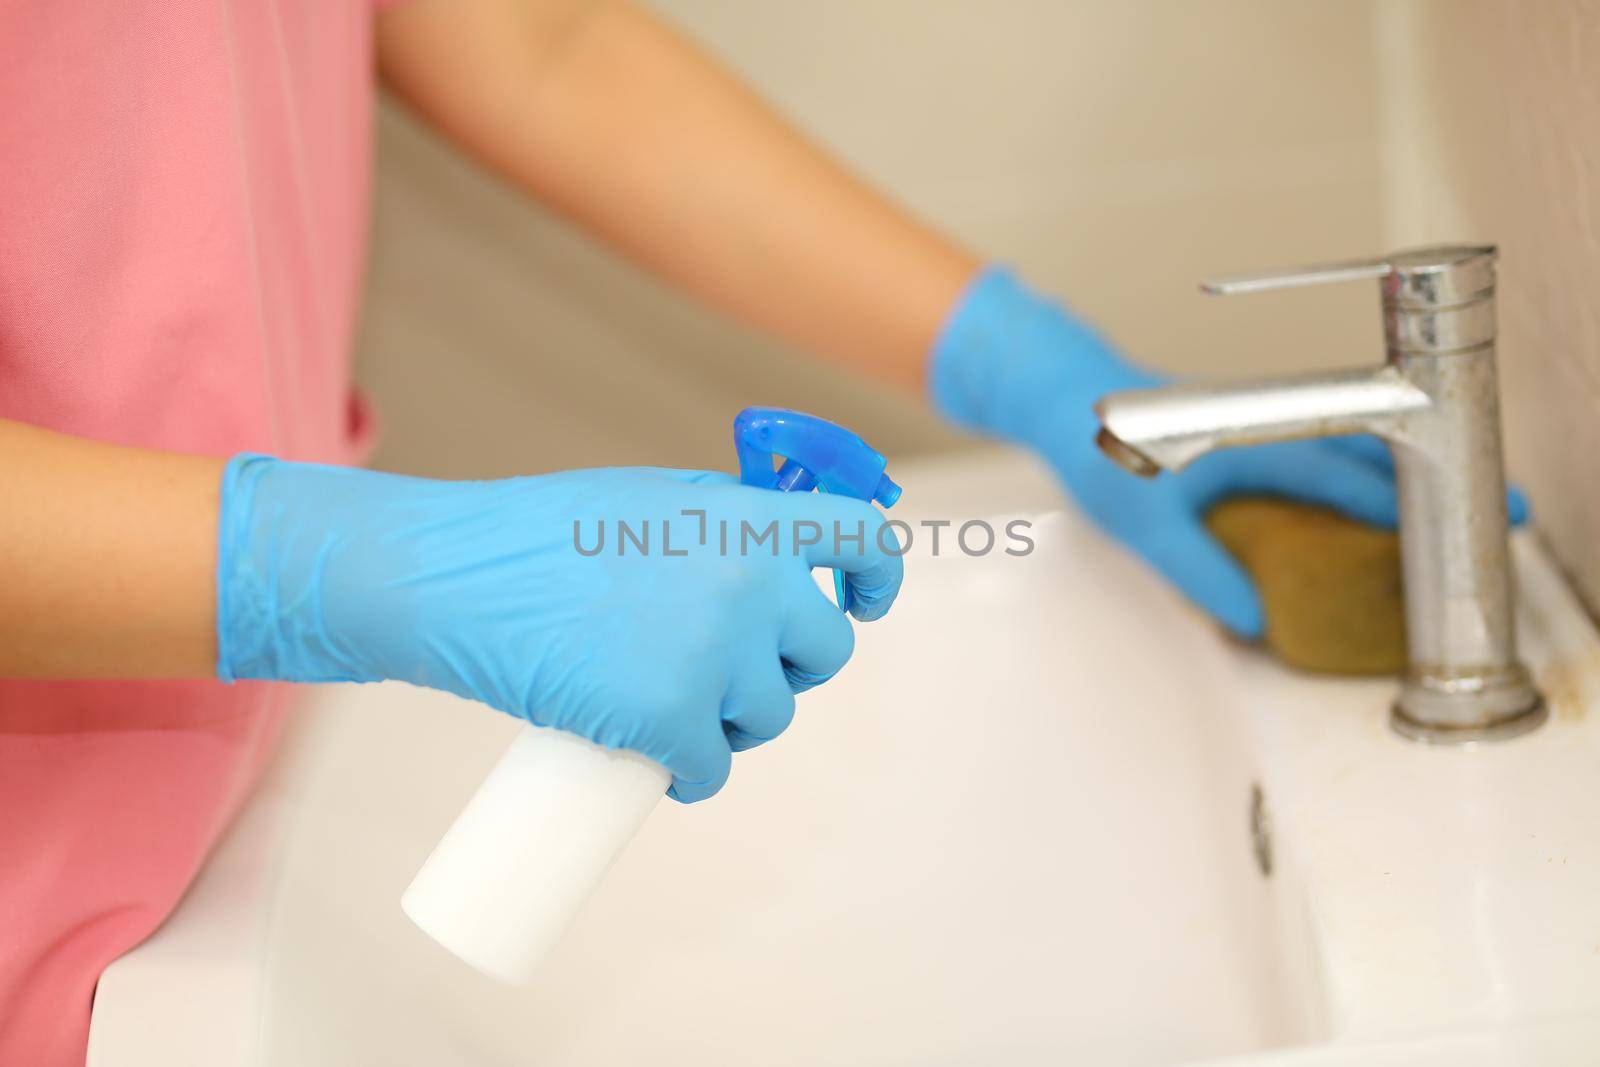 a hand in a blue rubber glove in the picture, removes and washes bathroom sink